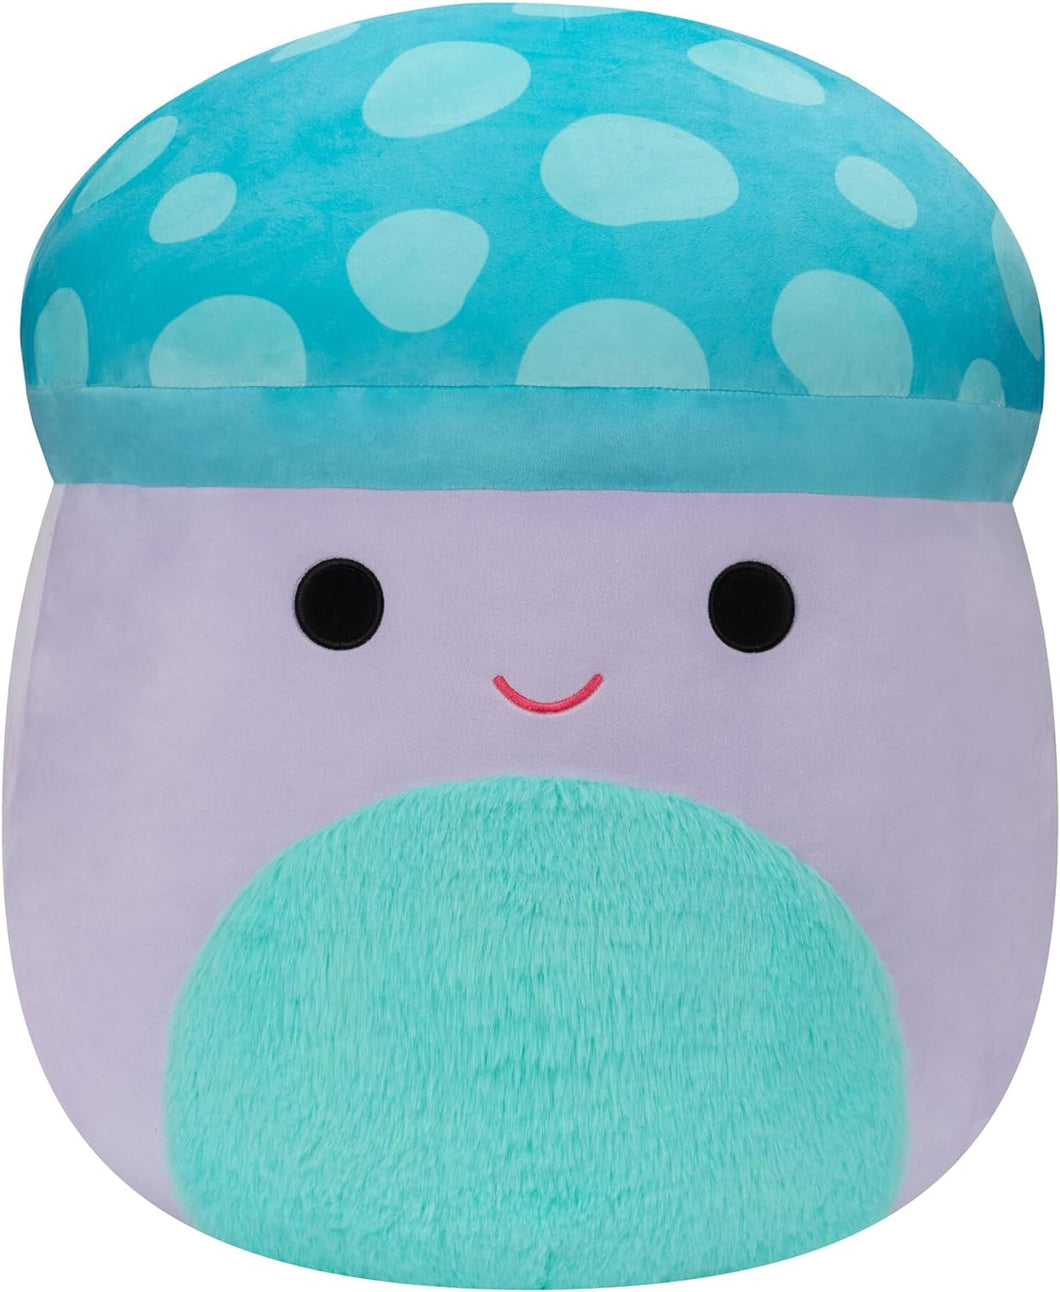 Squishmallows Pyle the Mushroom with Fuzzy Belly 20